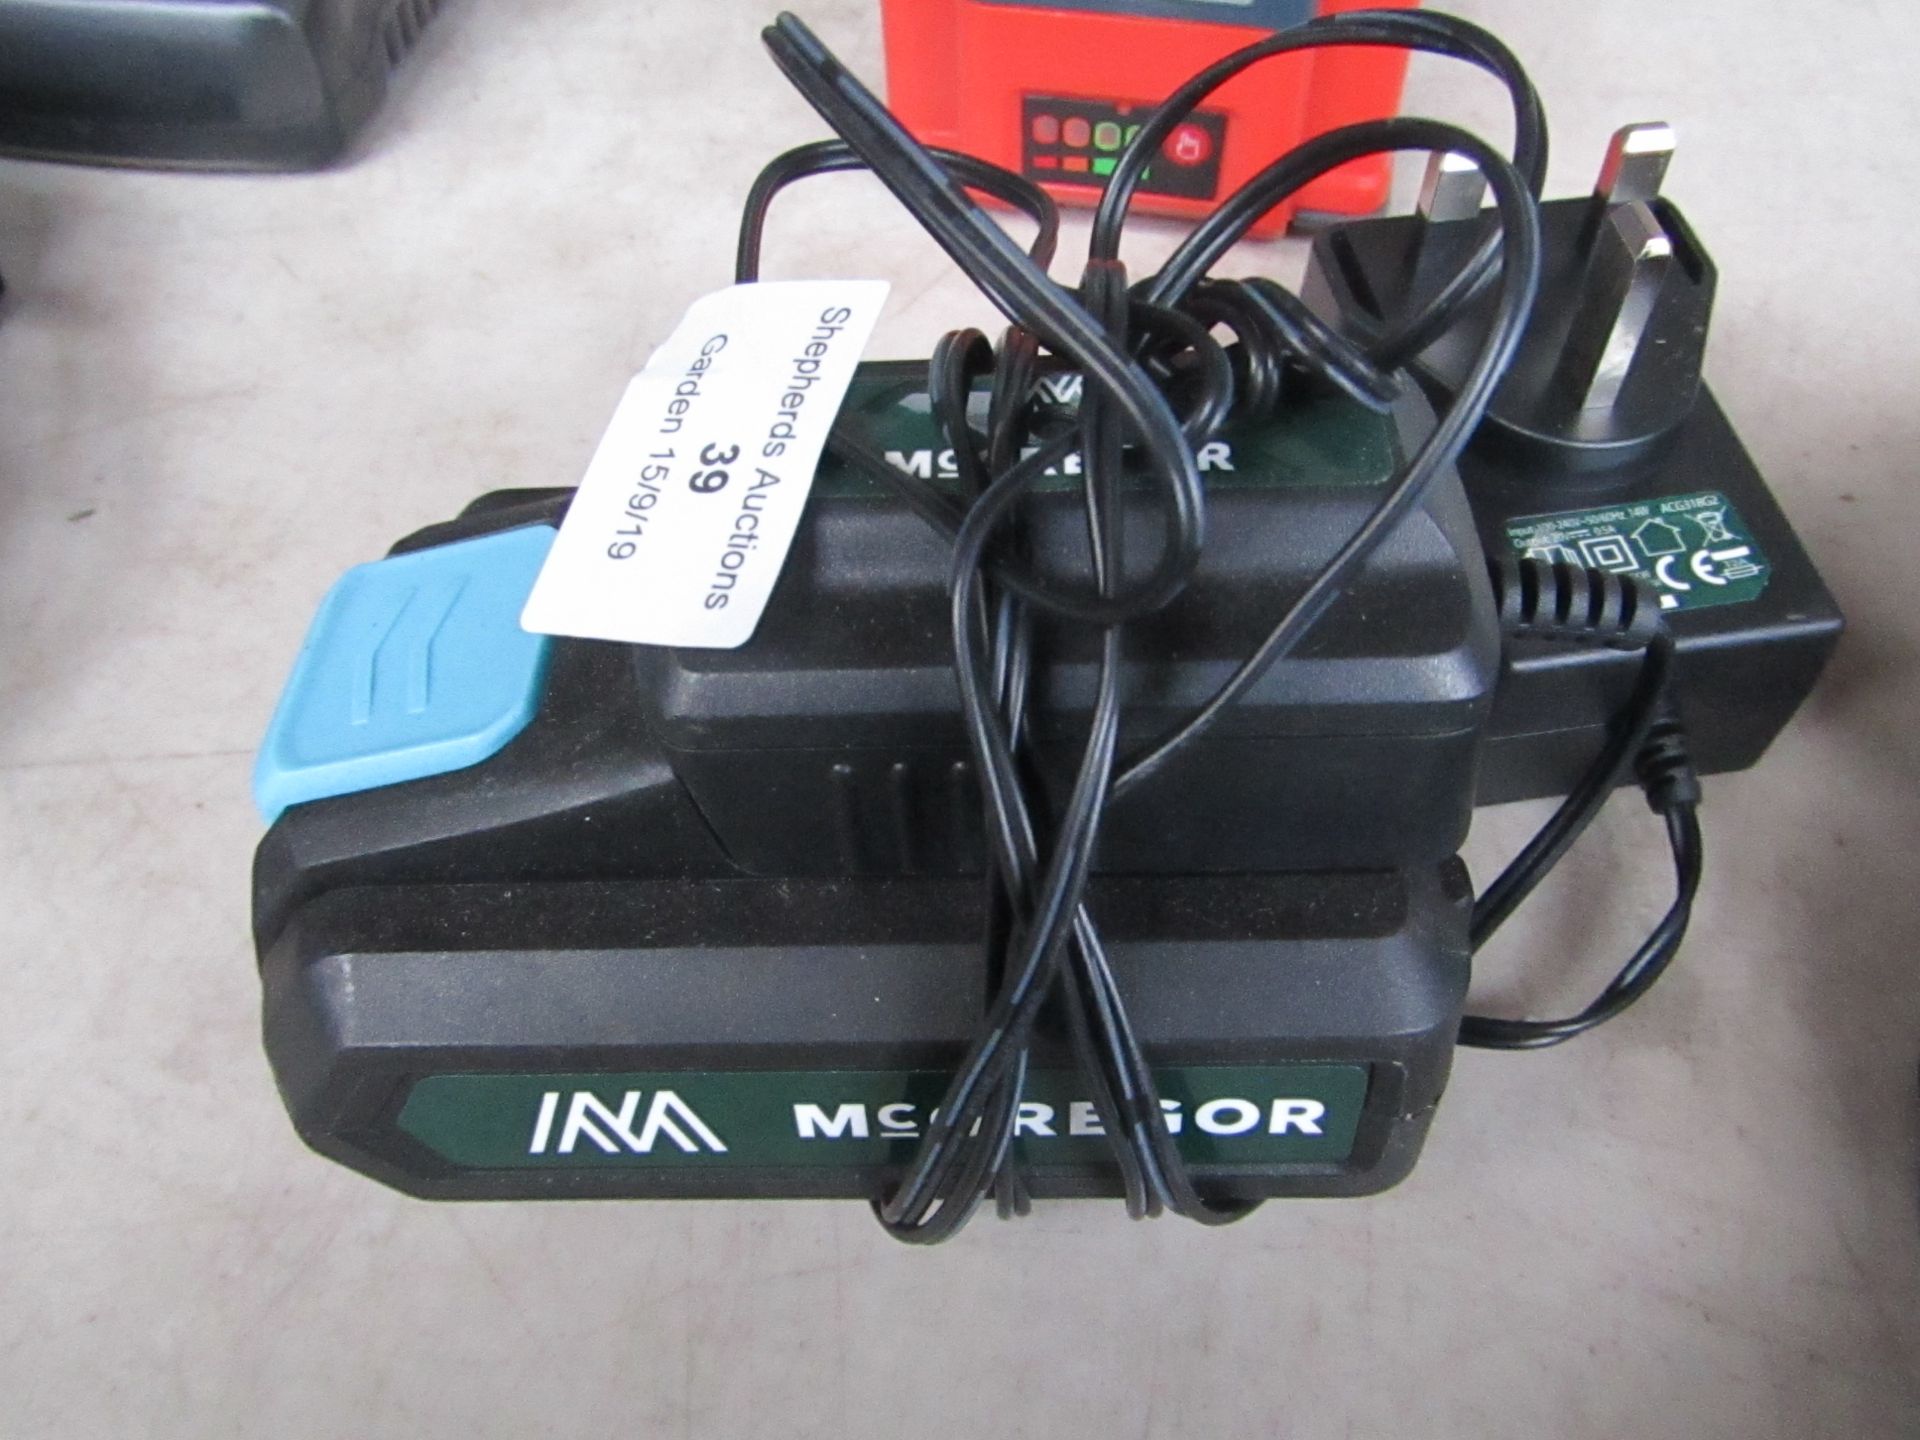 Mcgregor 18v Battery with charger, unchecked